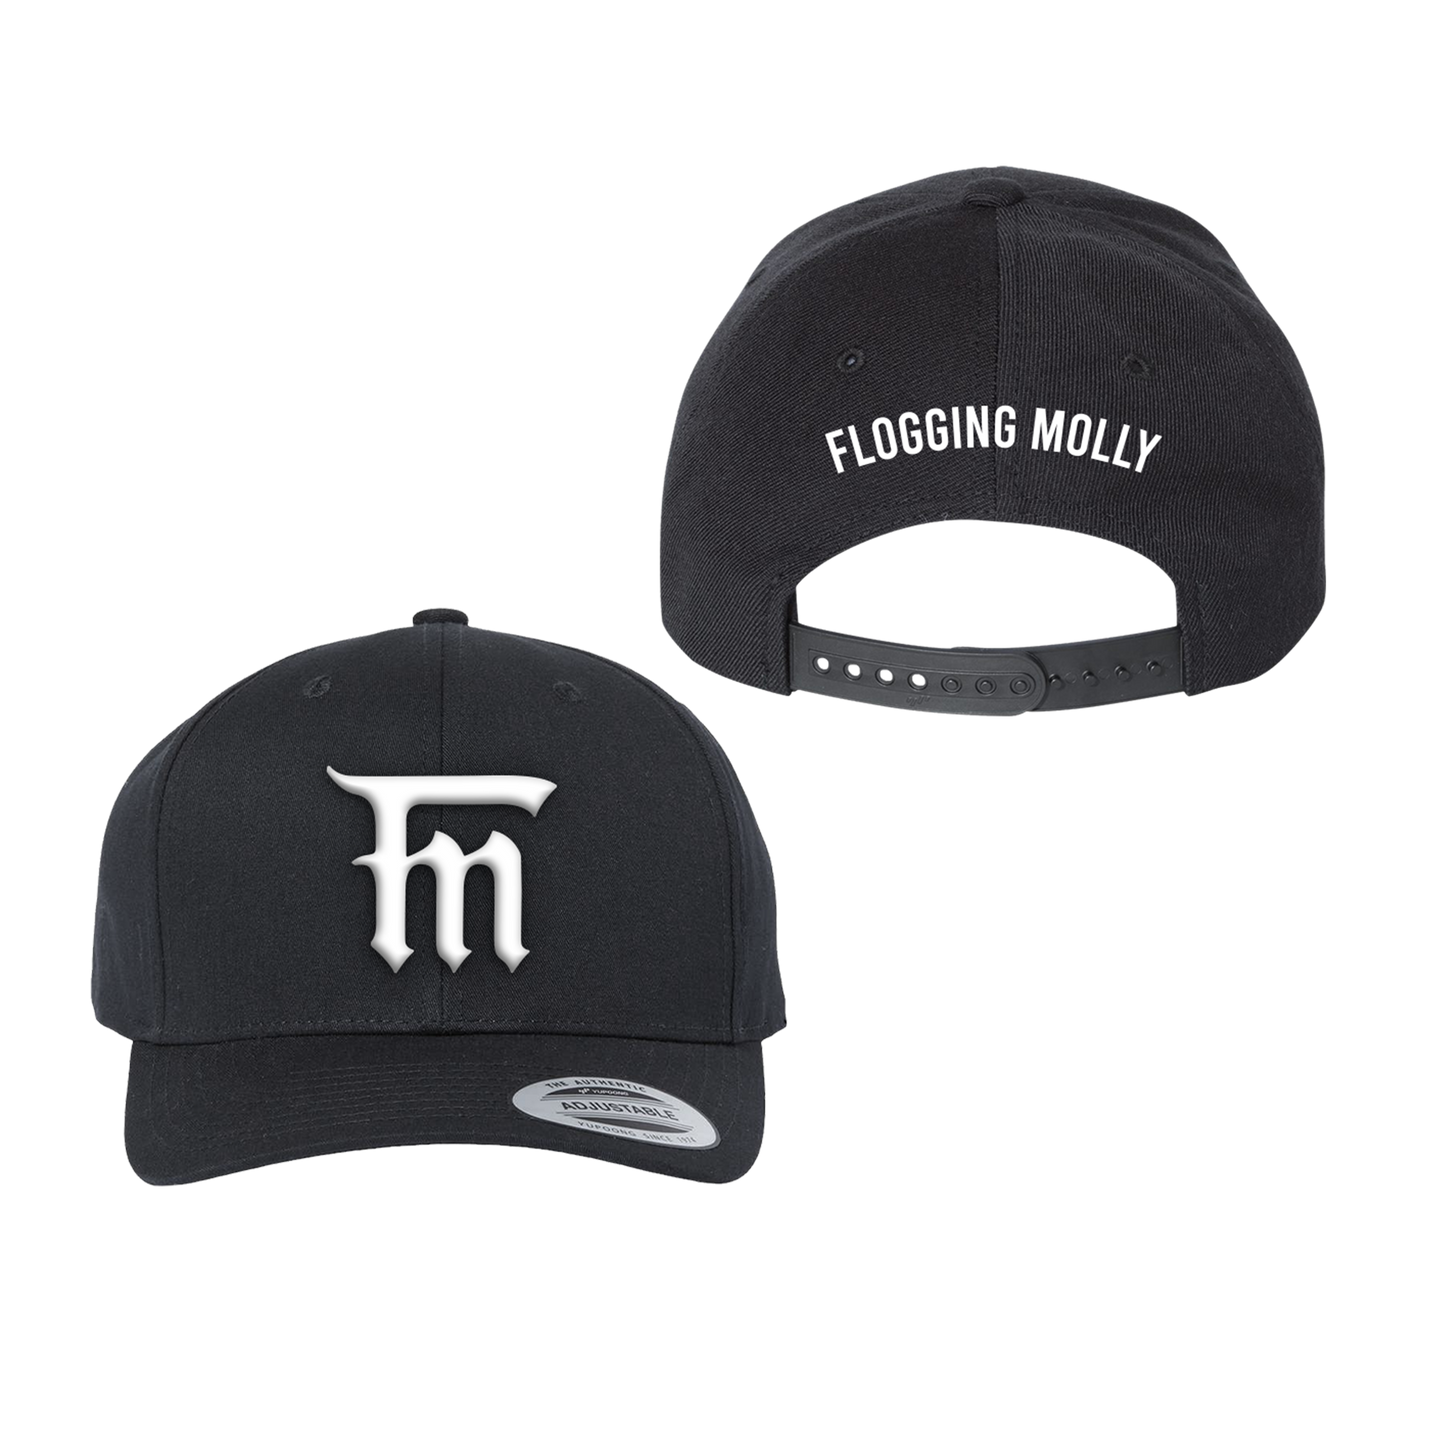 Snapback Hat with Puff embroidered logo